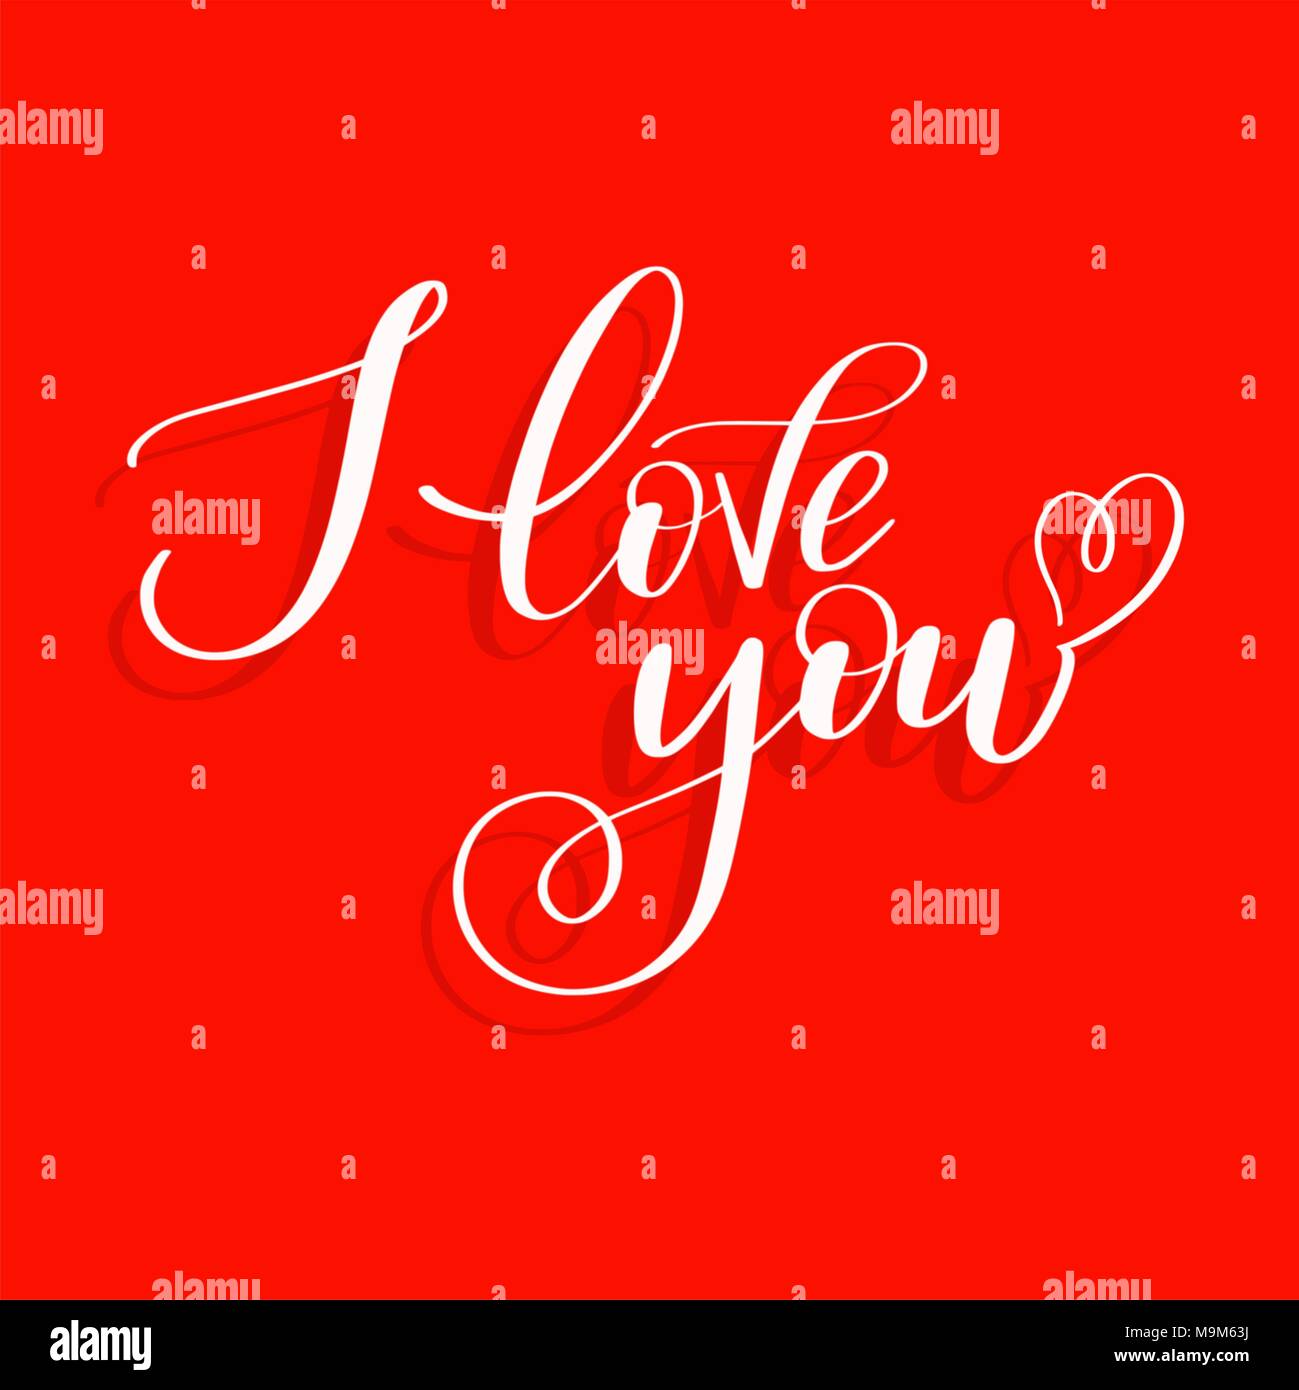 I love you on red background with heart, Calligraphic love lettering Stock Vector